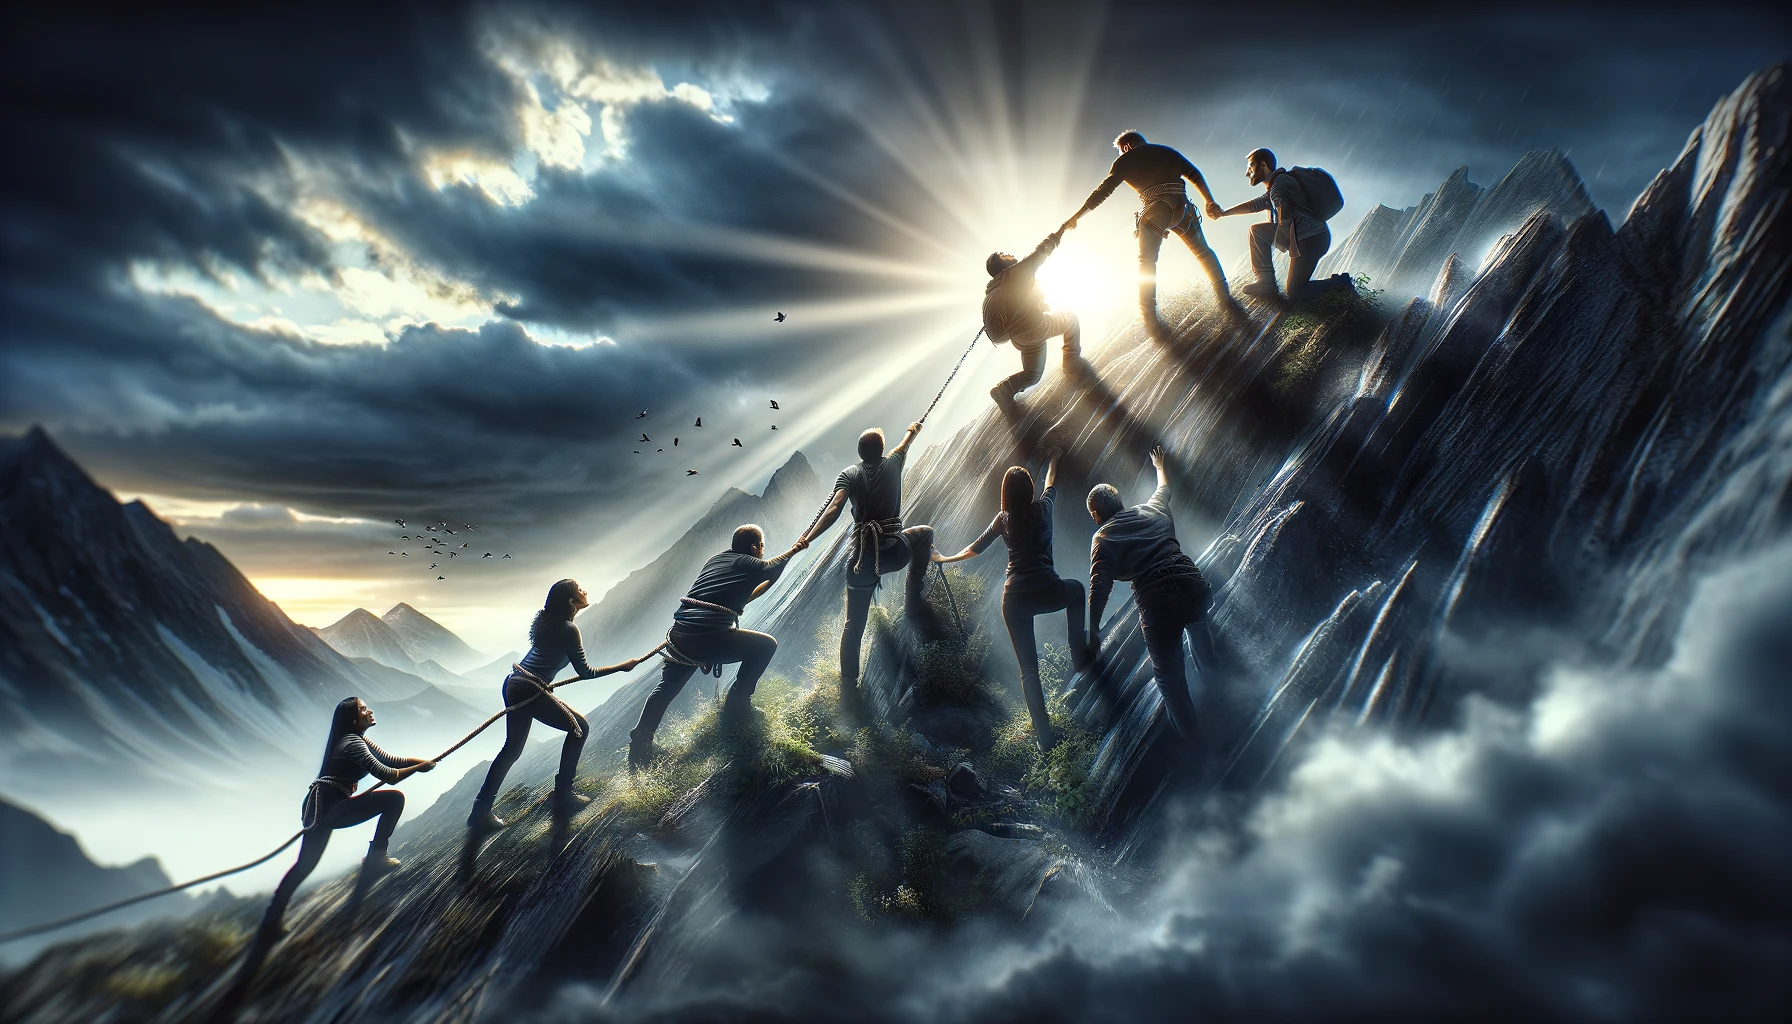 A 16_9 widescreen image that embodies the spirit of 'I Can't, But We Can'. The scene is set on a challenging mountain terrain, symbolizing obstacles a